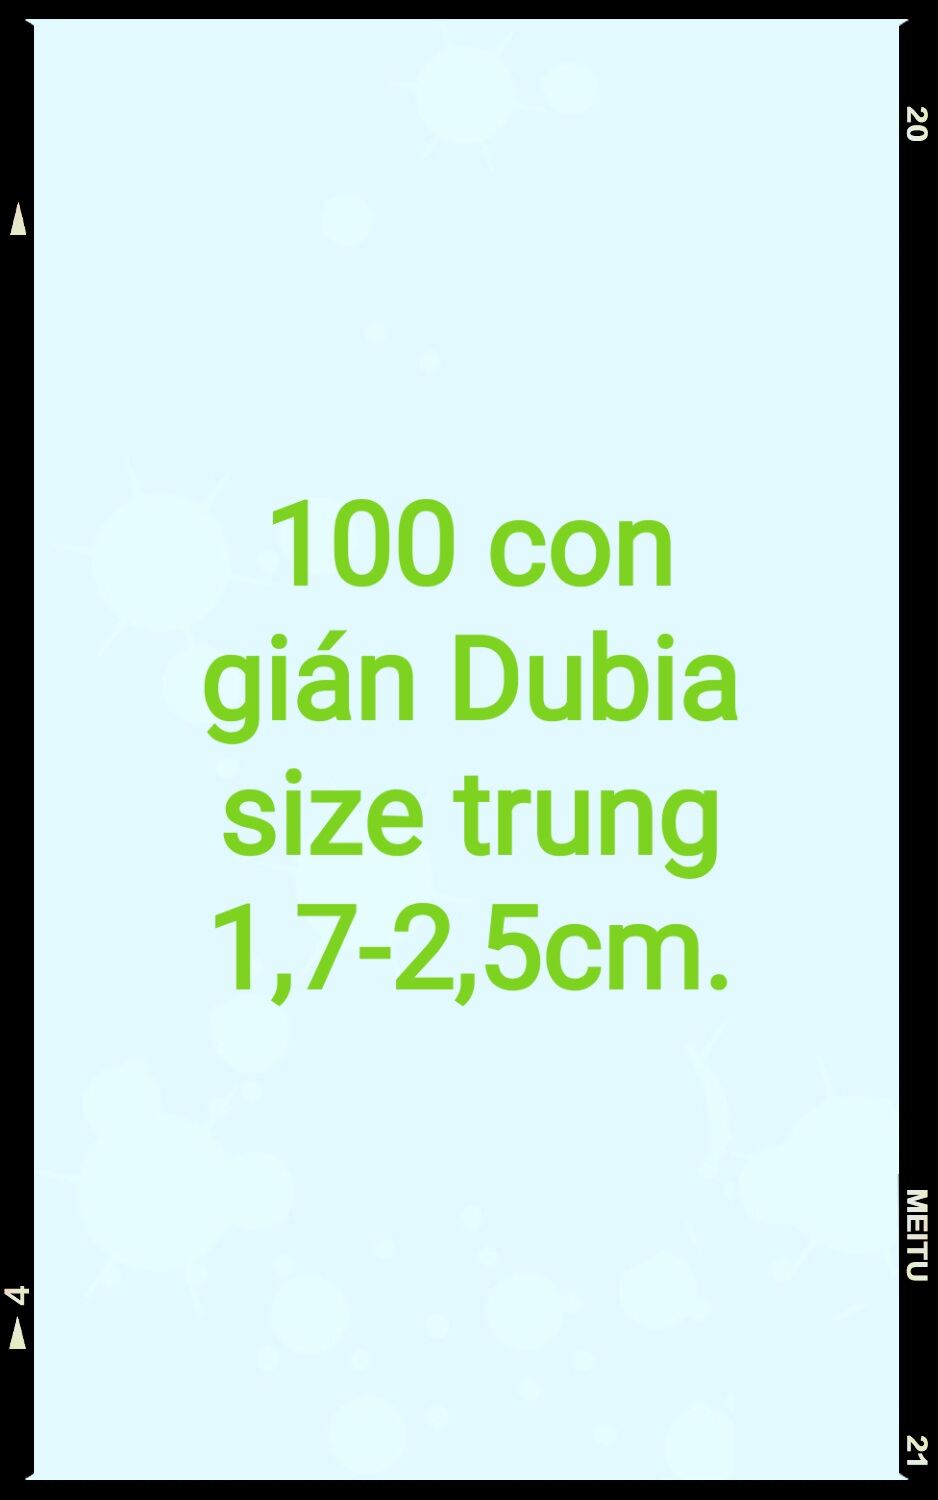 Hộp 100 con gián Dubia size trung 1,7-2